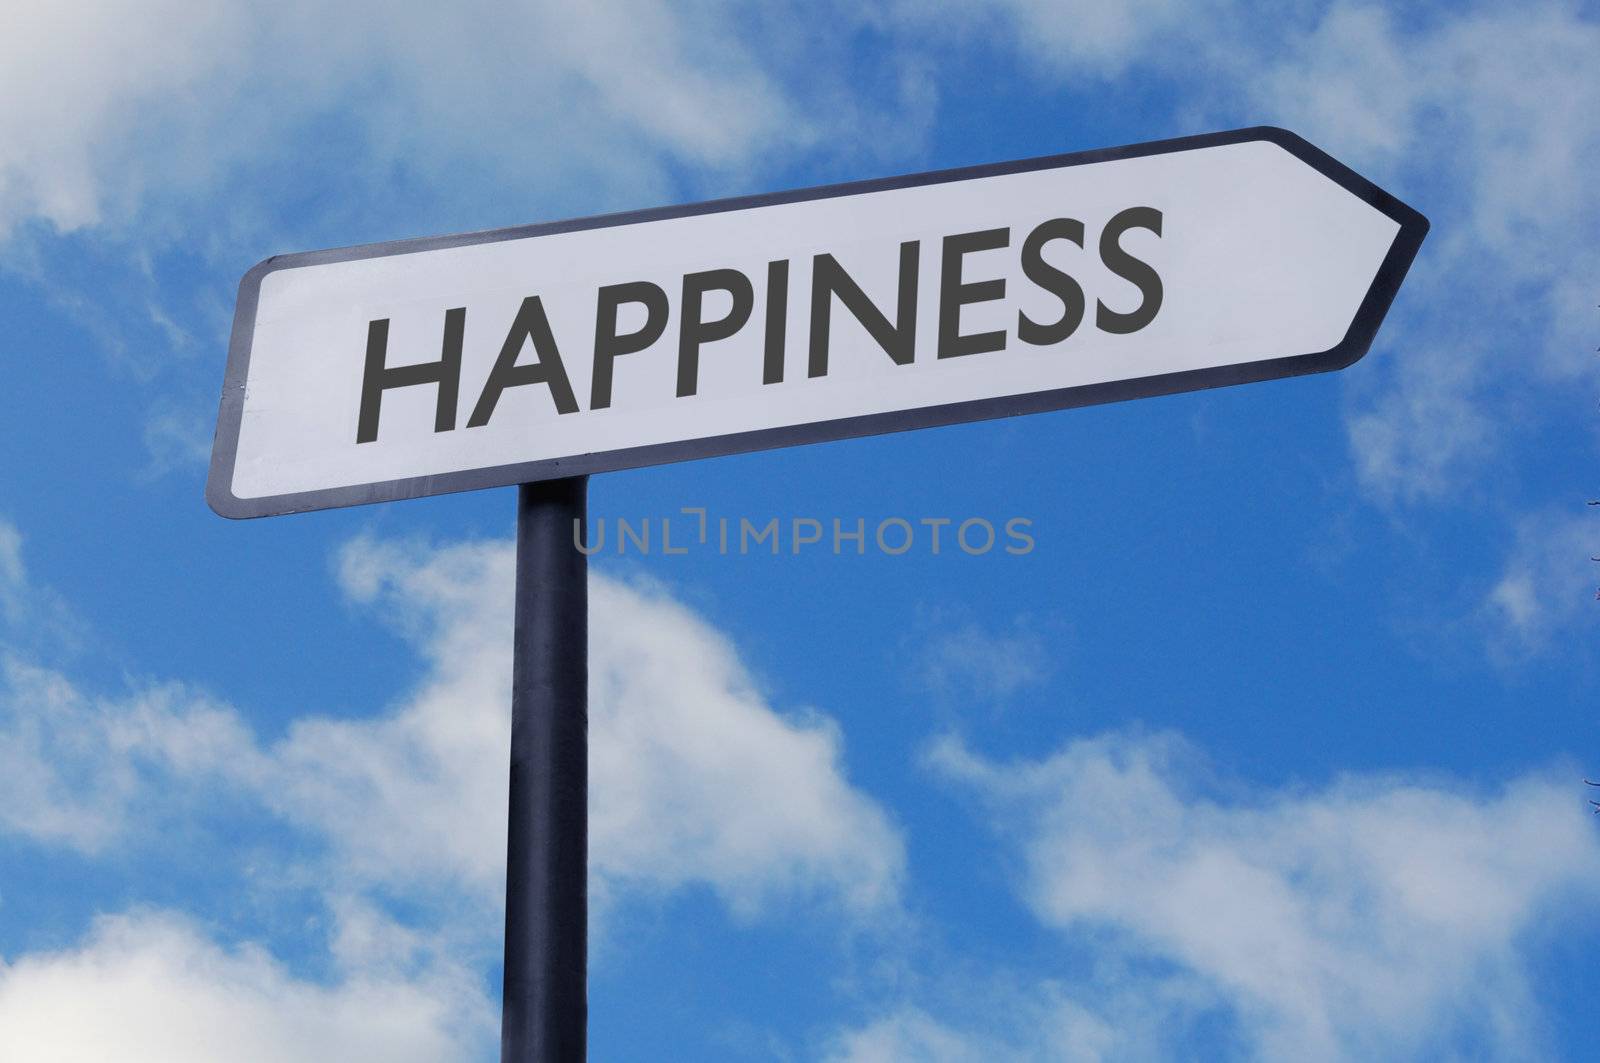 Happiness street sign with blue sky